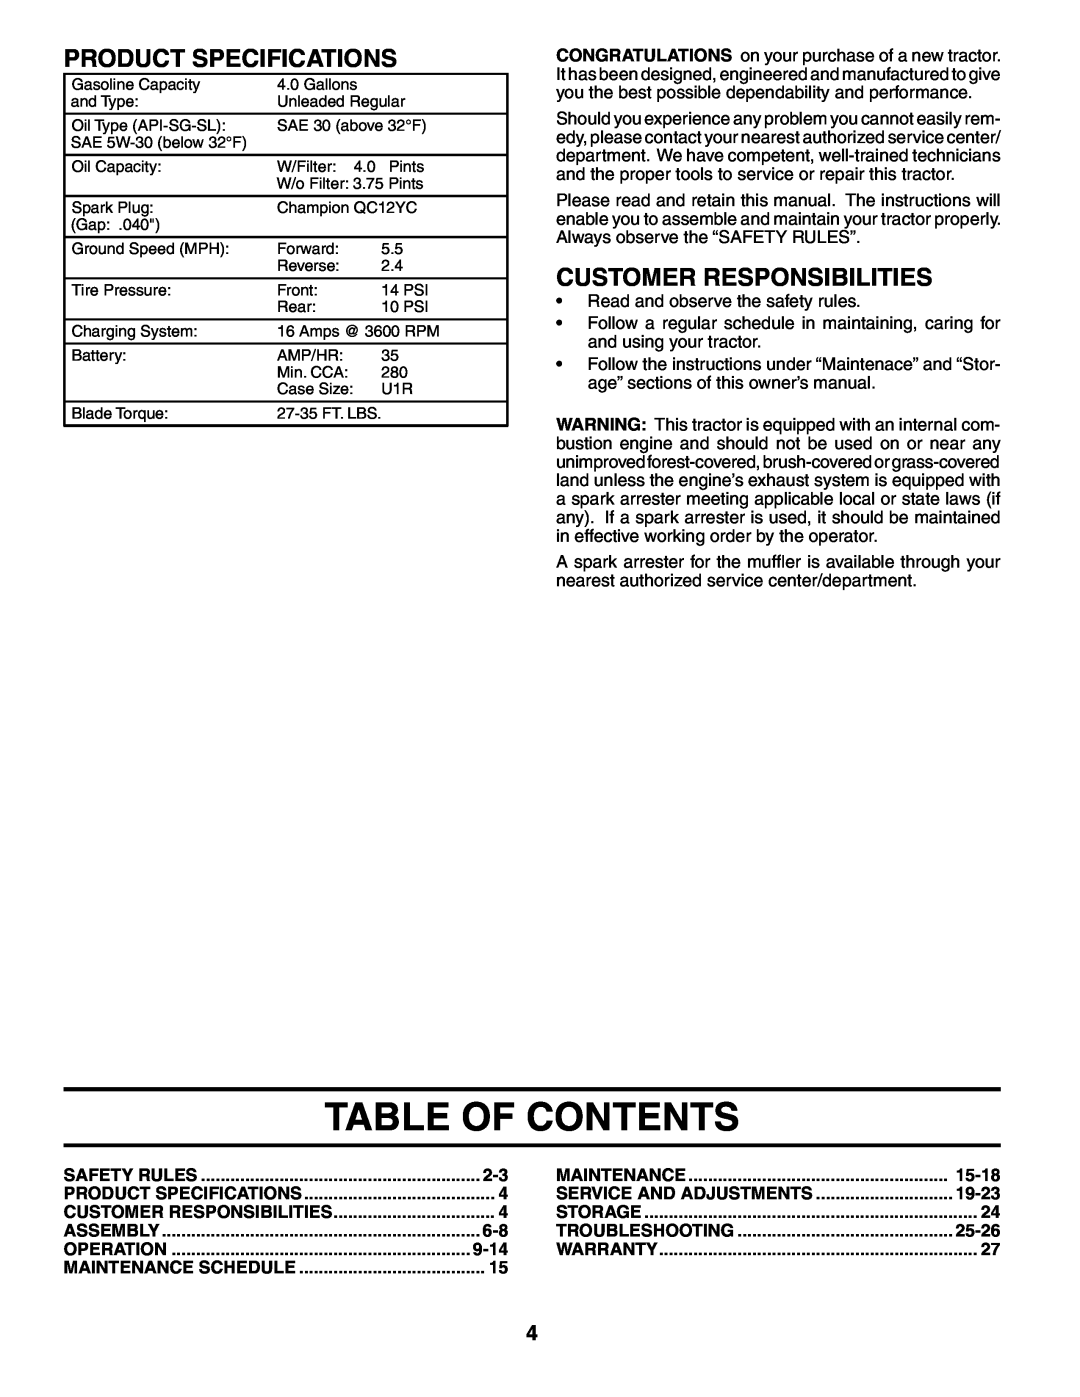 Poulan DB24H42YT manual Table Of Contents, Product Specifications, Customer Responsibilities 